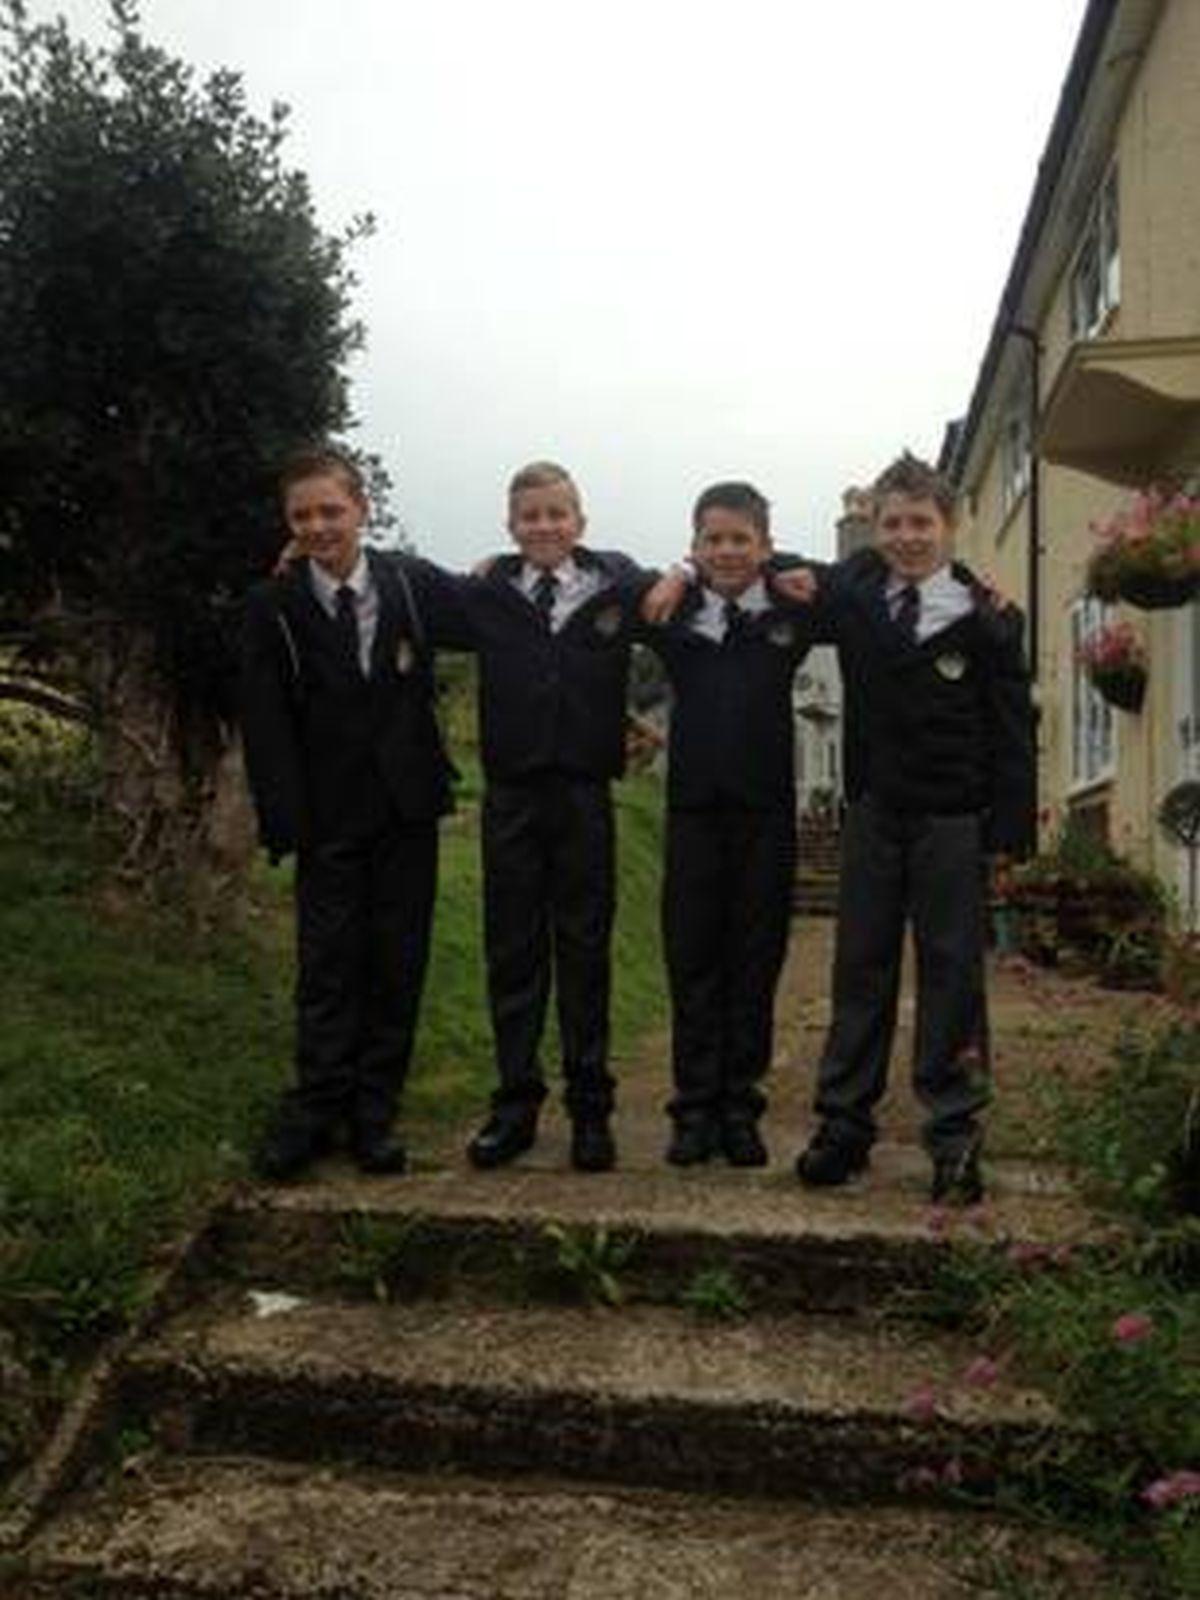 Back to School - Mikey, Connor, Nate and Ben, all from Charmouth, on their way to their first day at Woodroffe School in Lyme Regis.